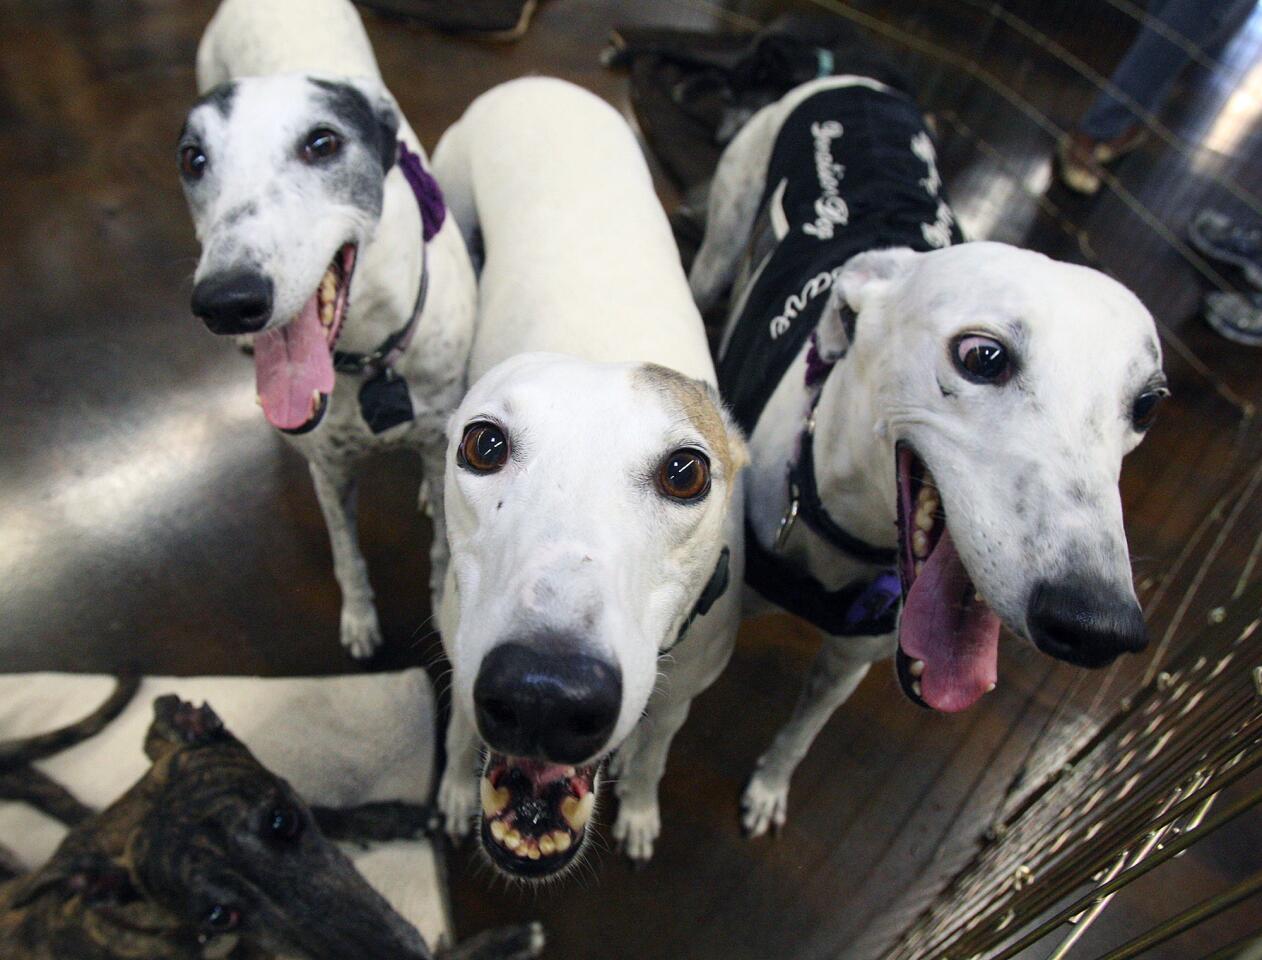 Photo Gallery: Grey Save showcases greyhounds at Centinela in Burbank